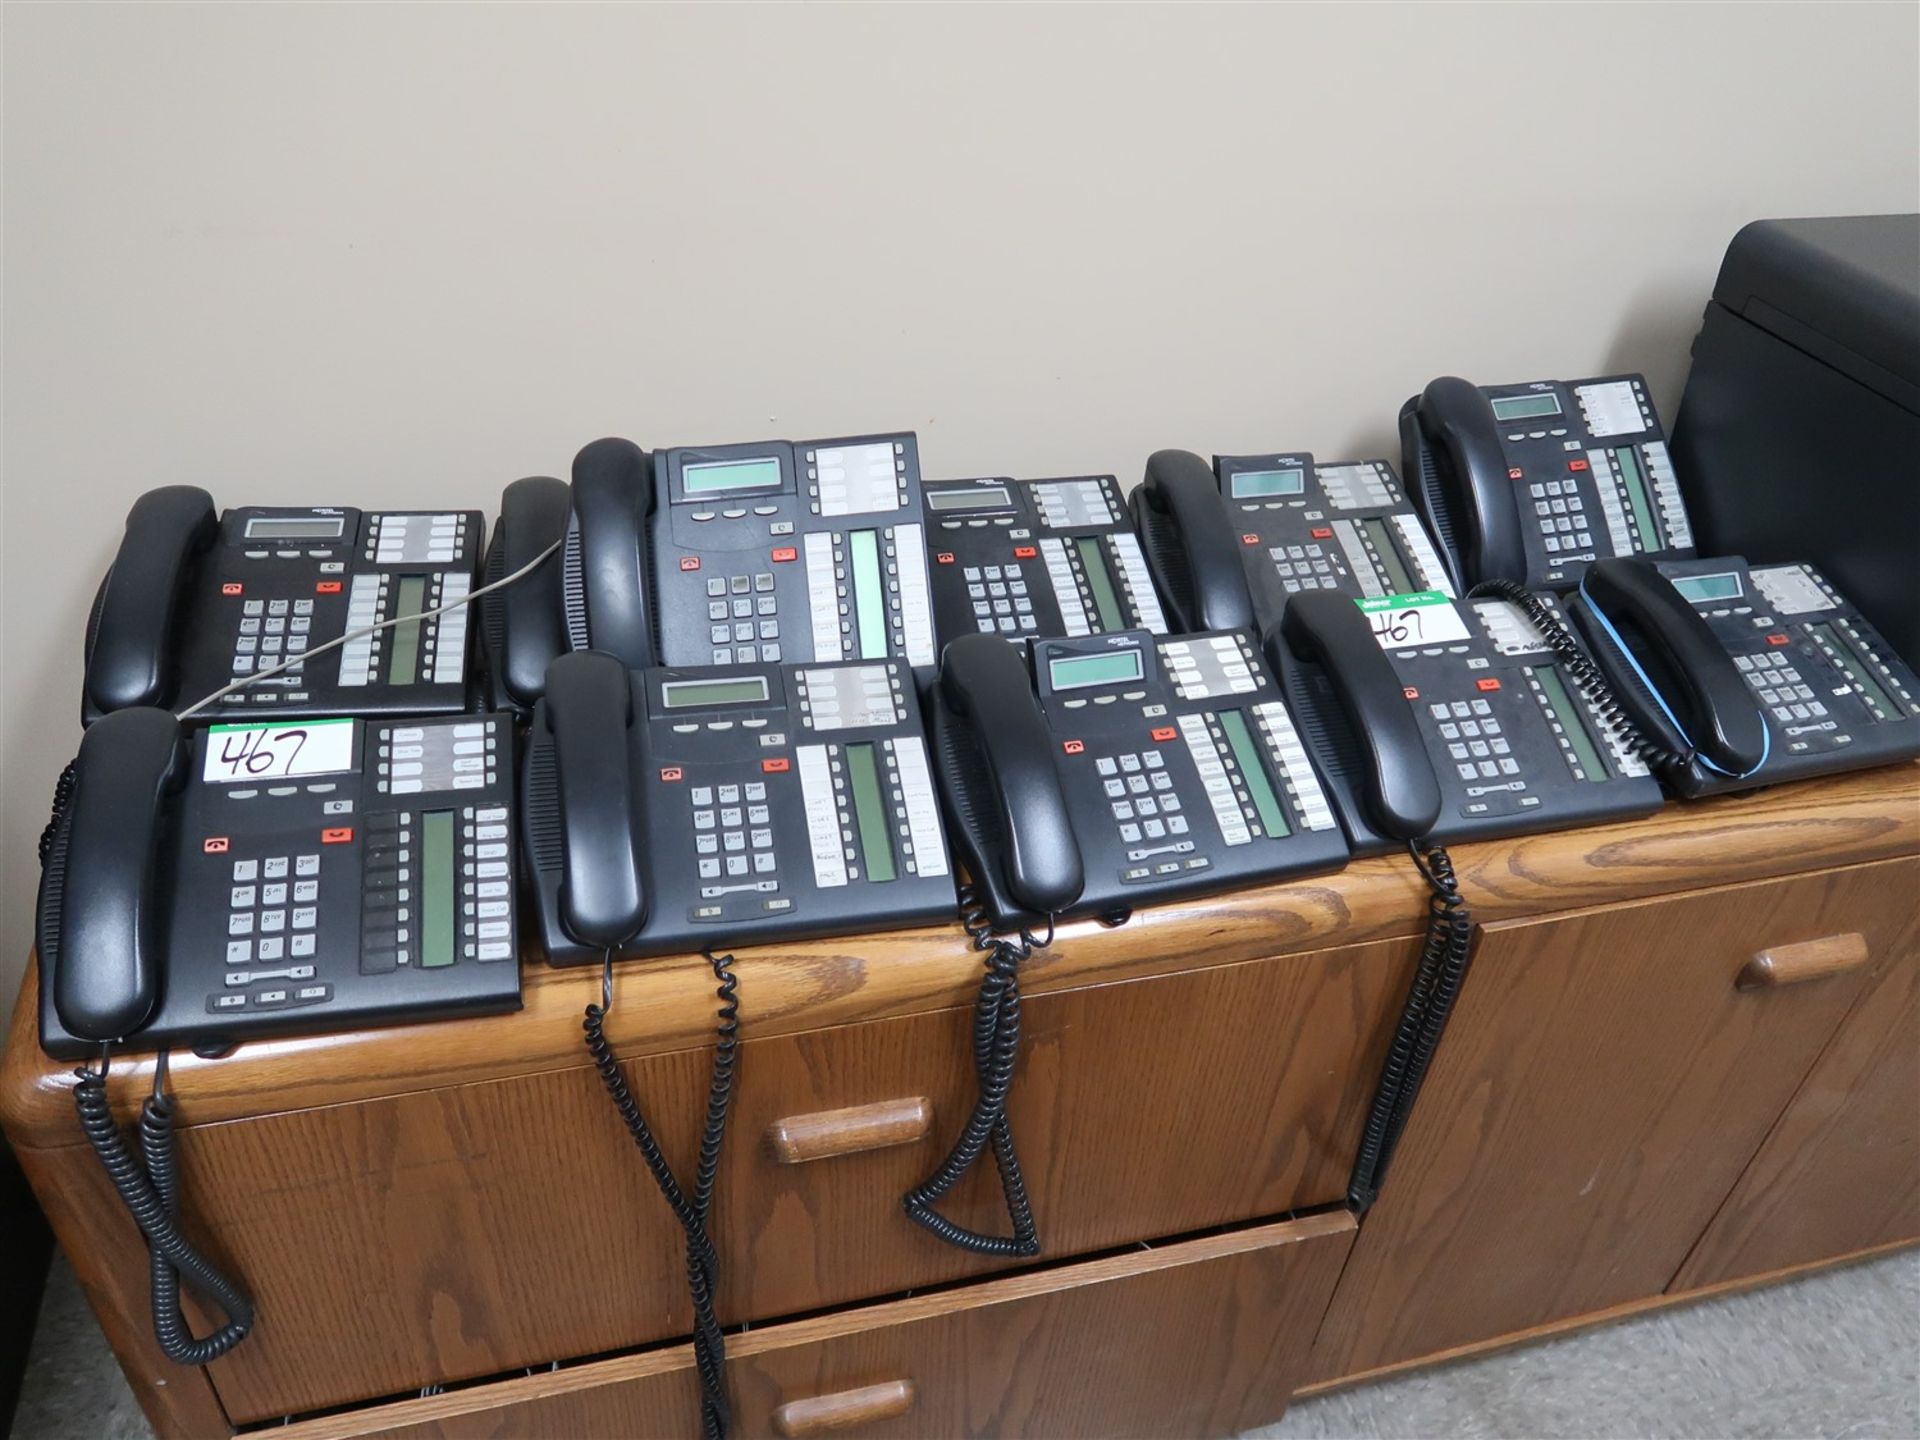 NORTEL NETWORKS MERIDIAN PHONE SYSTEM W/11 HAND SETS